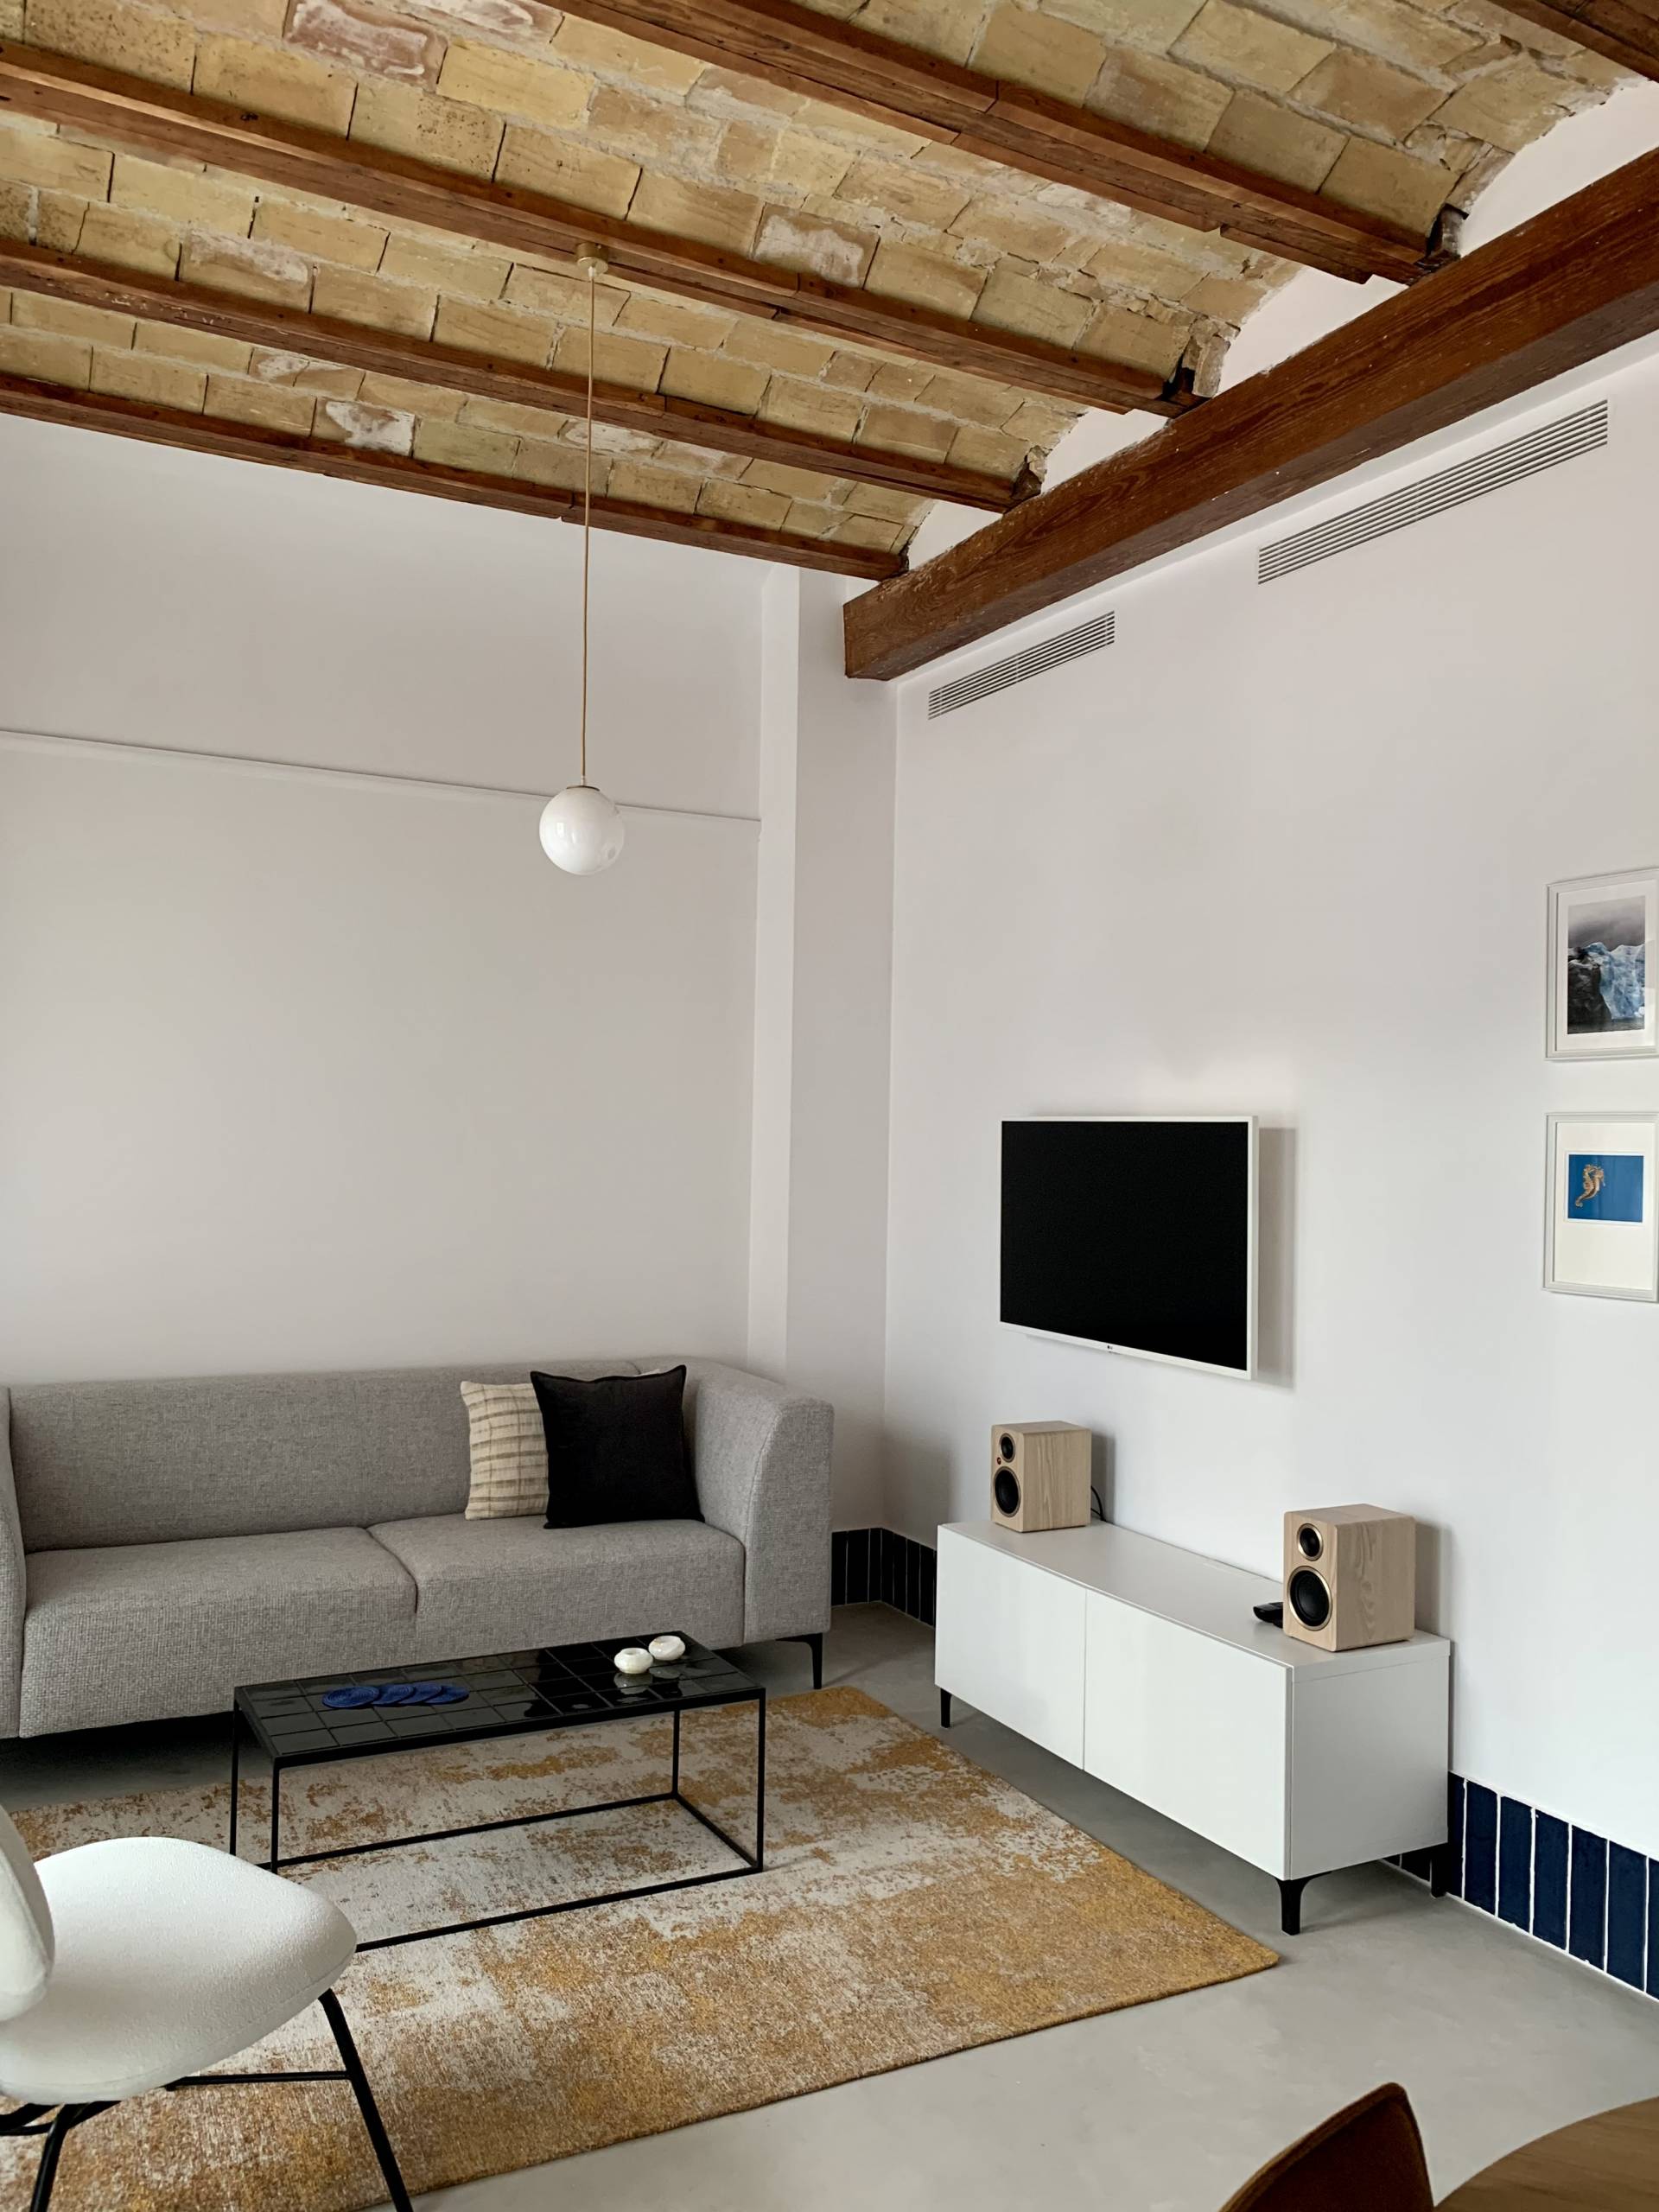 Olivereta - Beautiful monthly rental for rent in Valencia